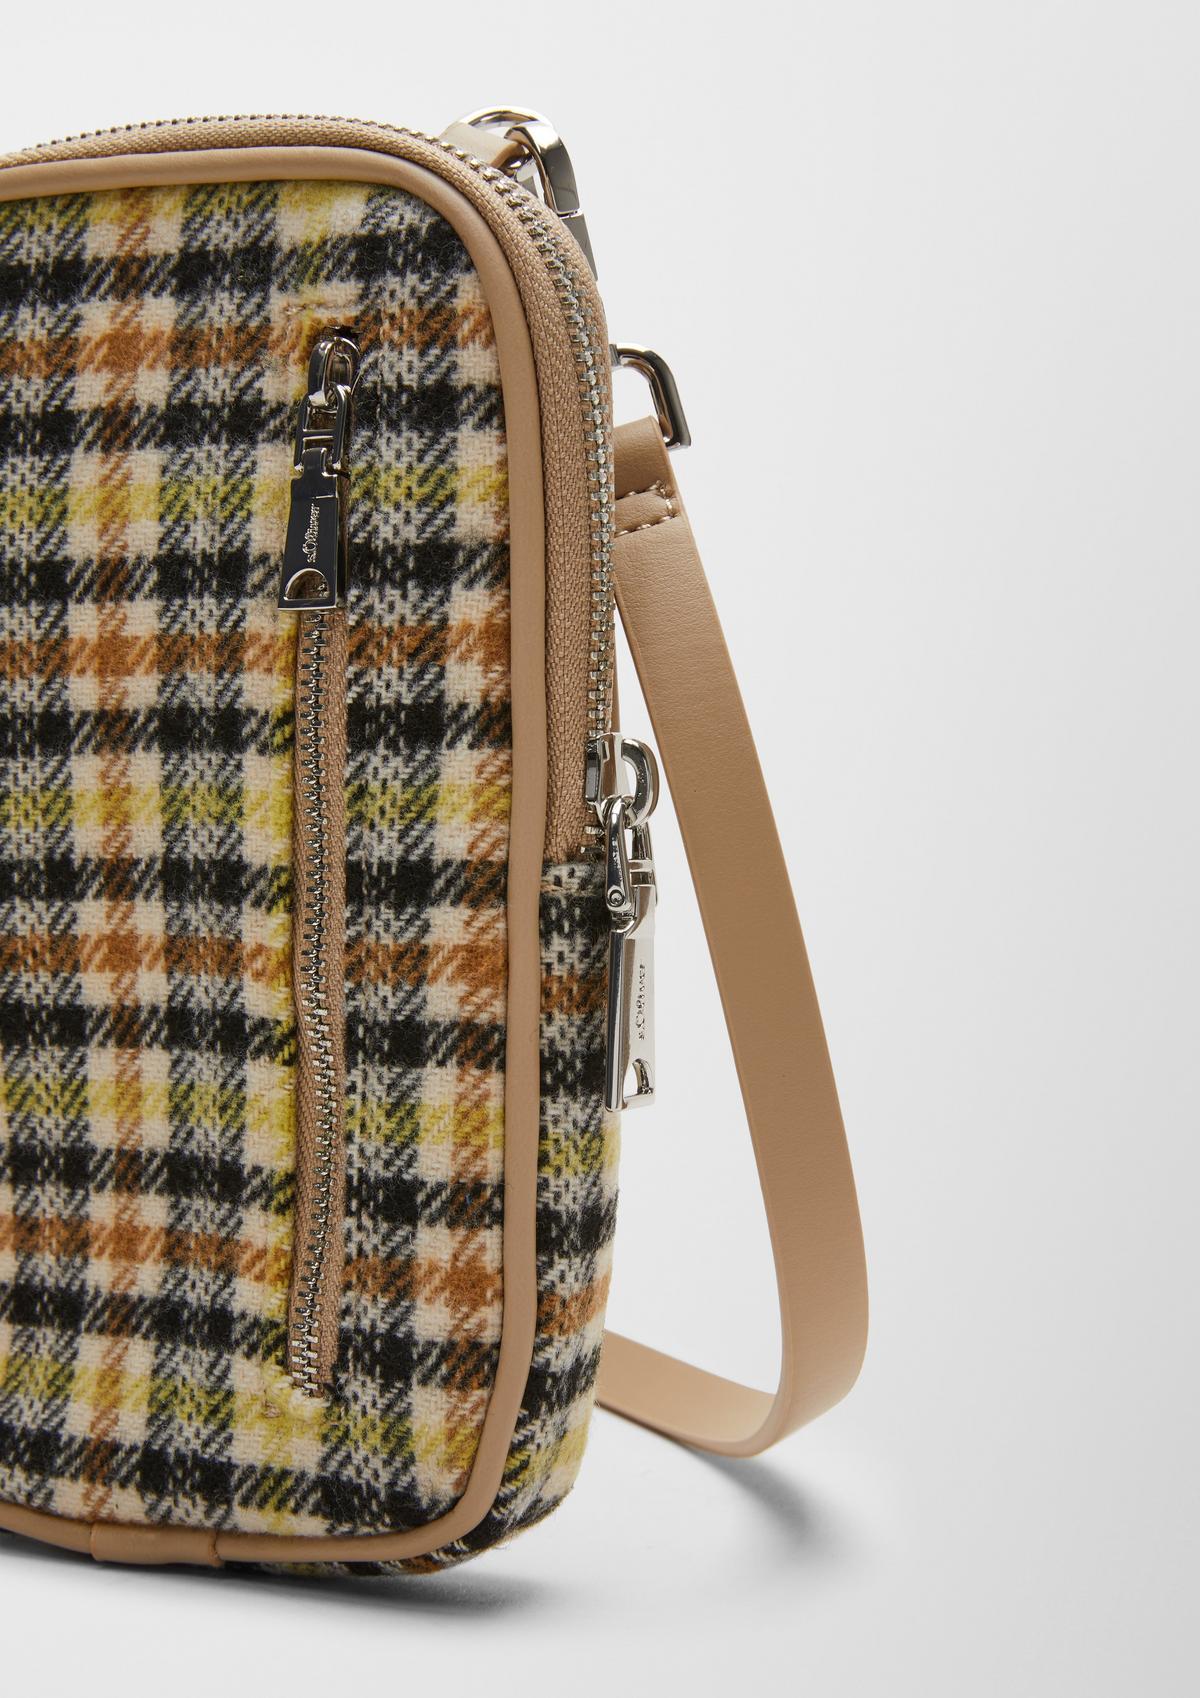 s.Oliver Mobile phone pouch in a checked pattern